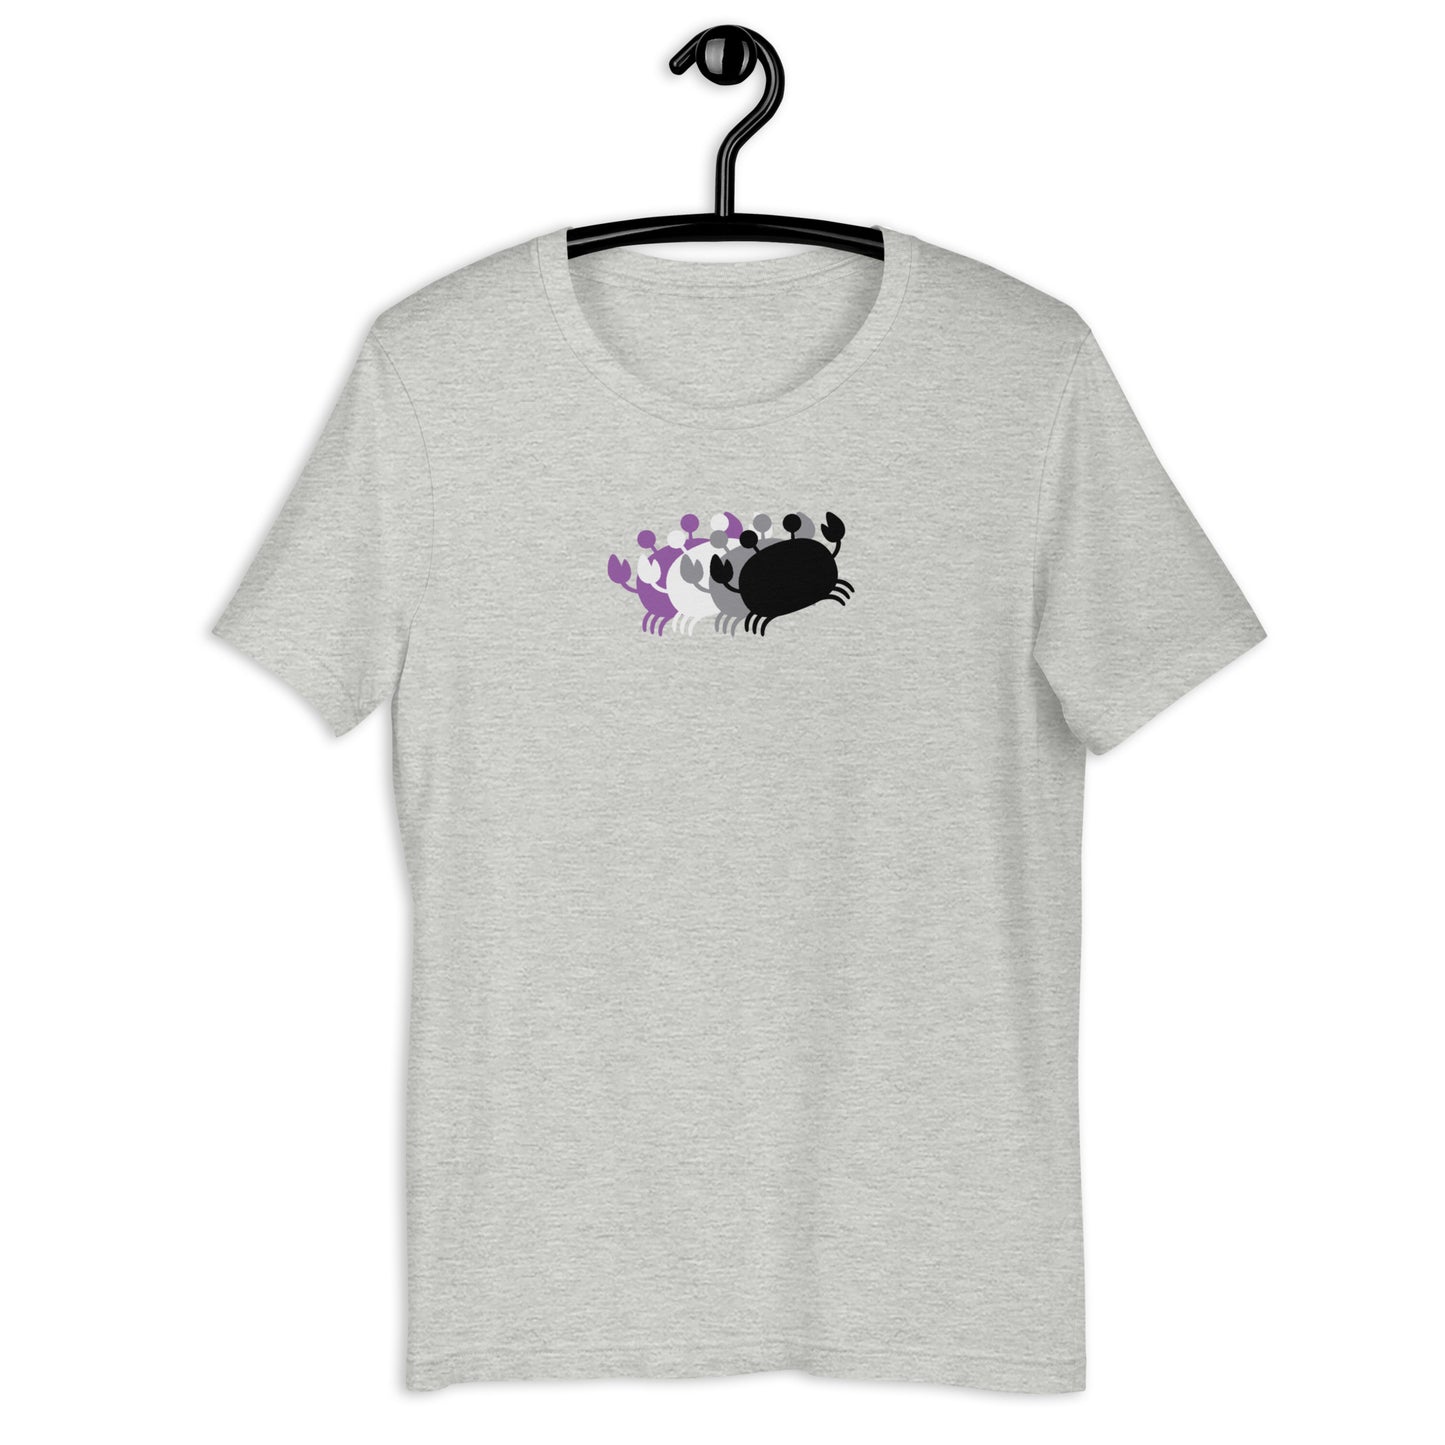 Crab People Asexual Flag T-Shirt